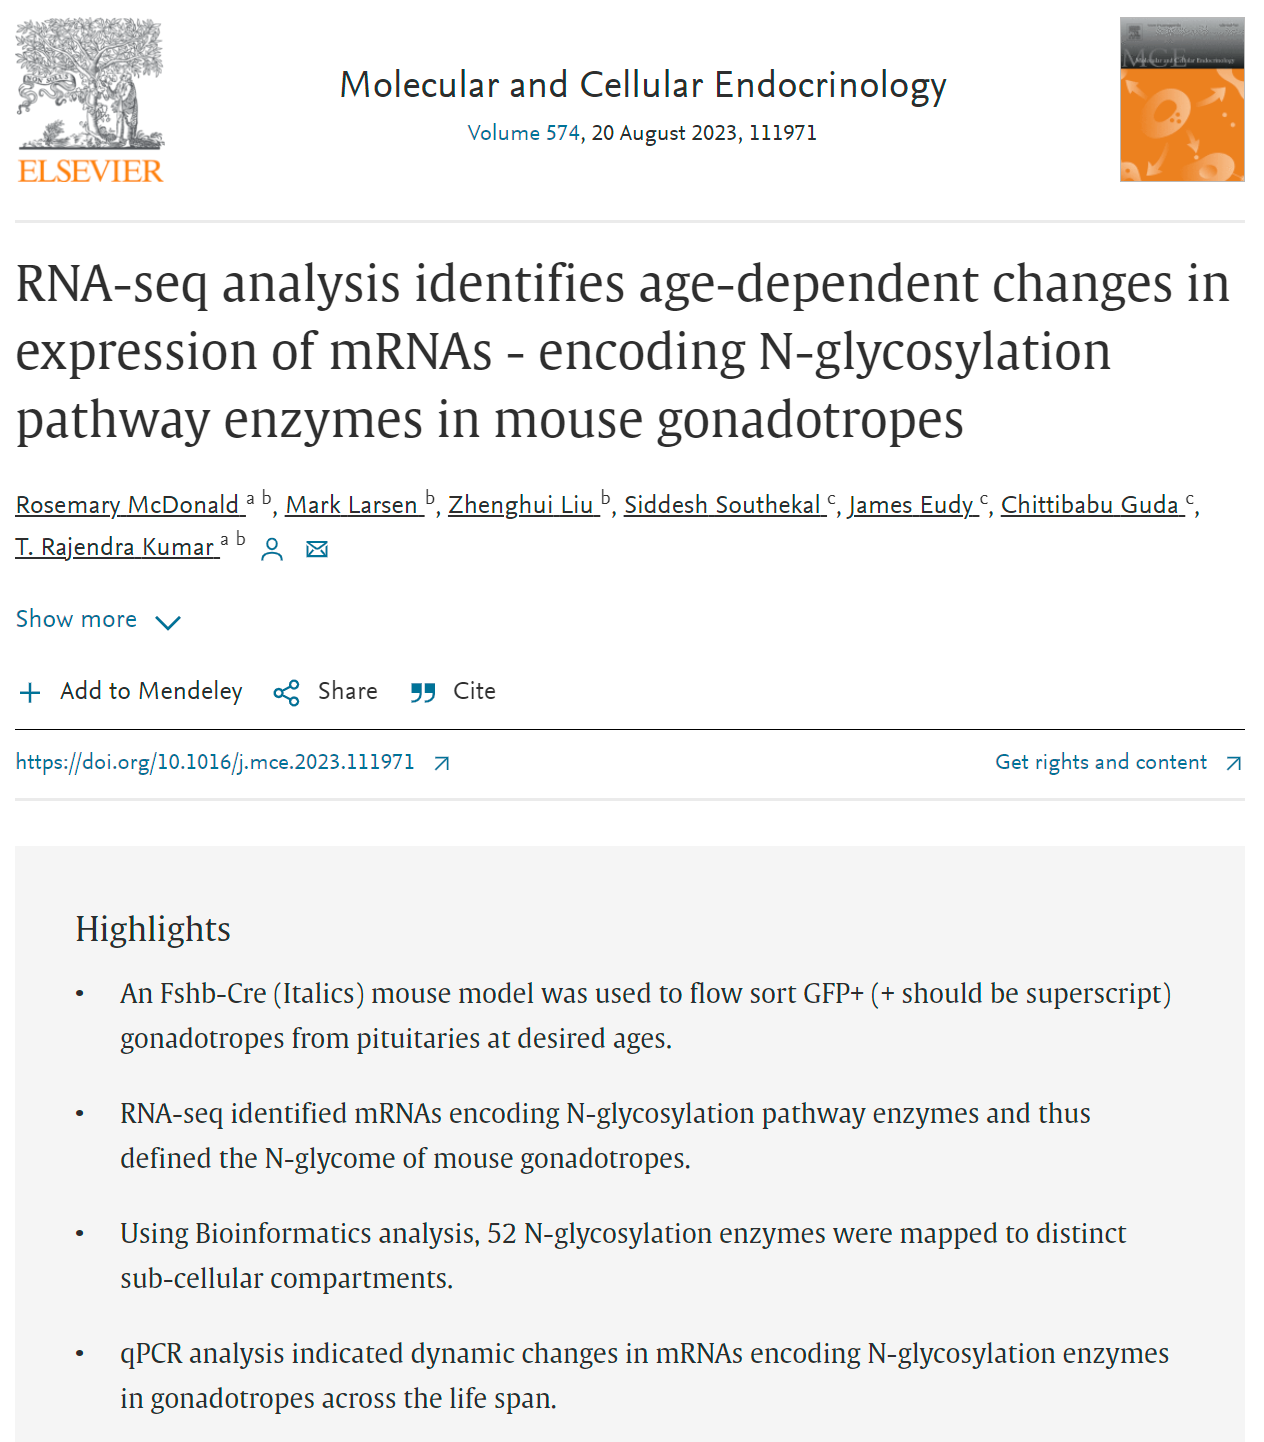 RNA-seq analysis identifies age-dependent changes in expression of mRNAs - encoding N-glycosylation pathway enzymes in mouse gonadotropes